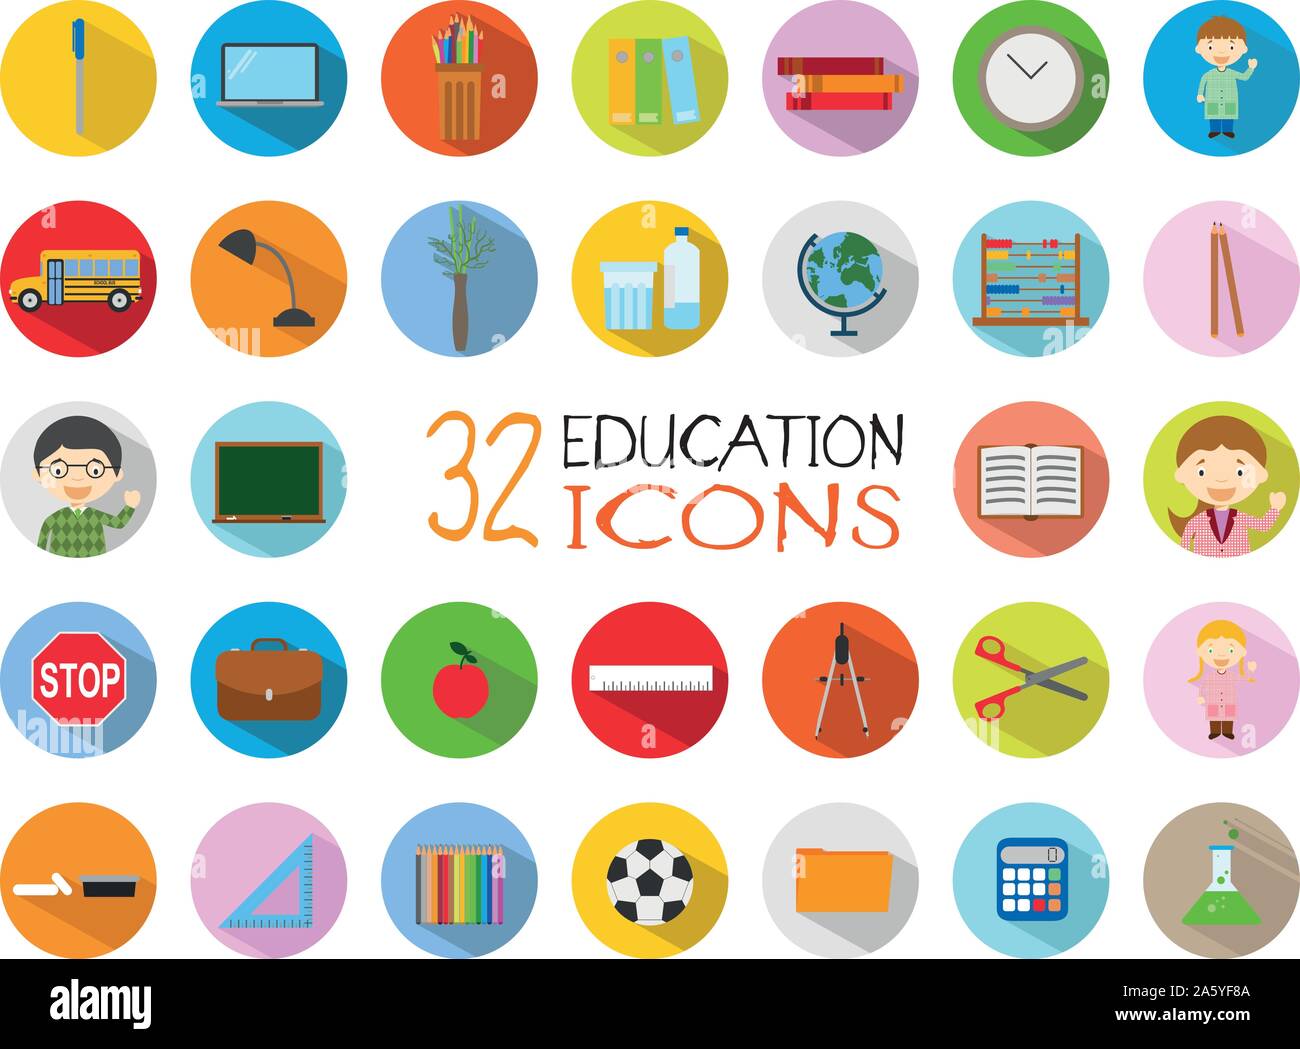 32 Education Icons Set. Colorful, flat style vector Illustration. Stock Vector